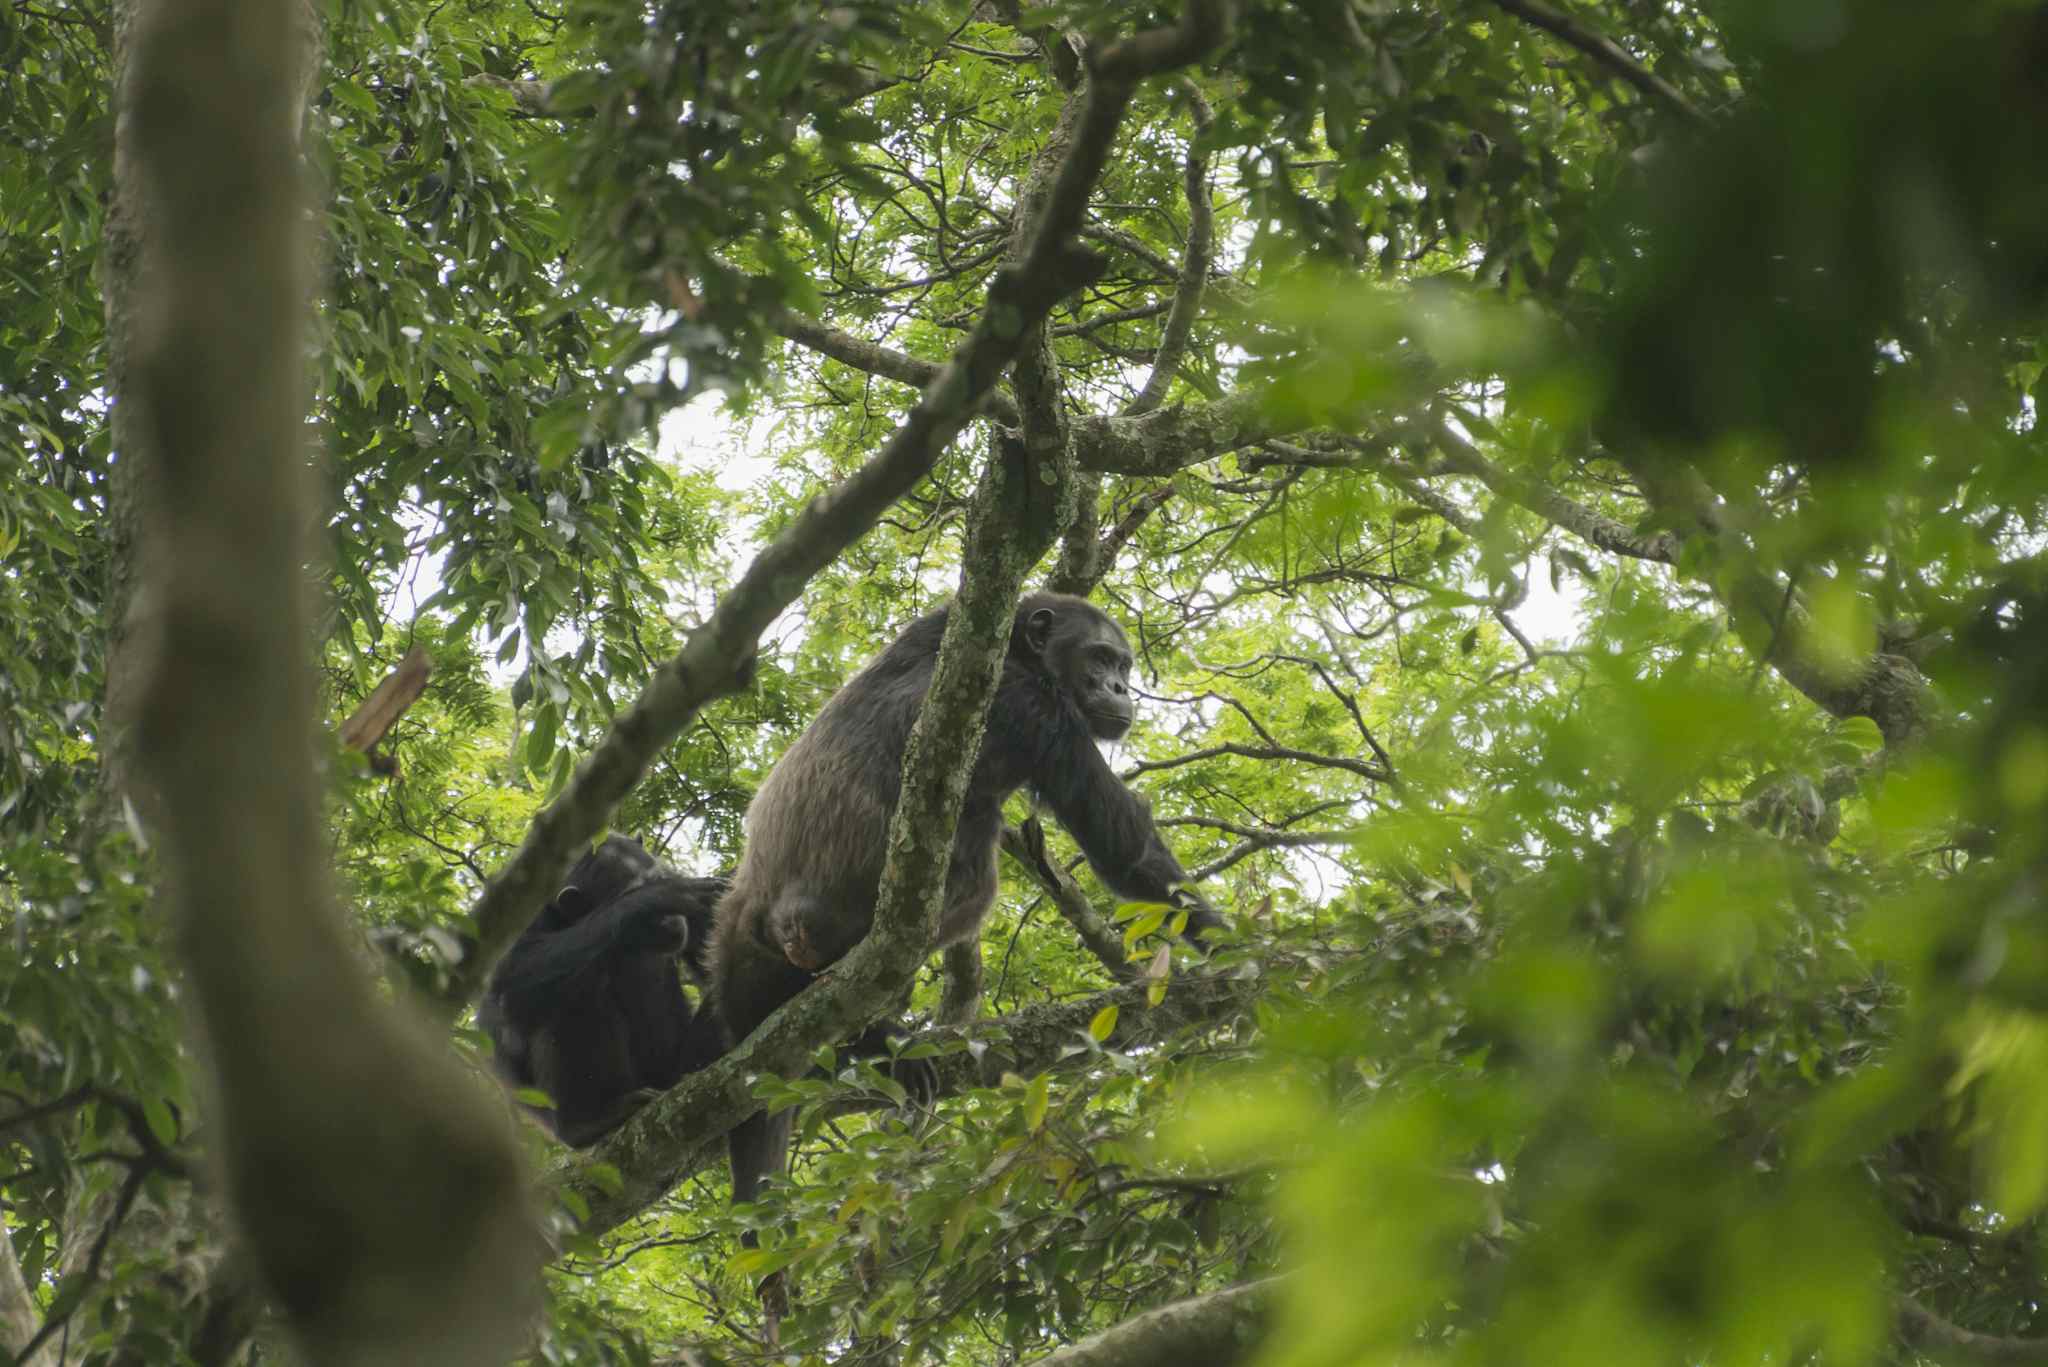 Chimpanzee in Mahale National Park, Tanzania. Photo: GettyImages-1187587501